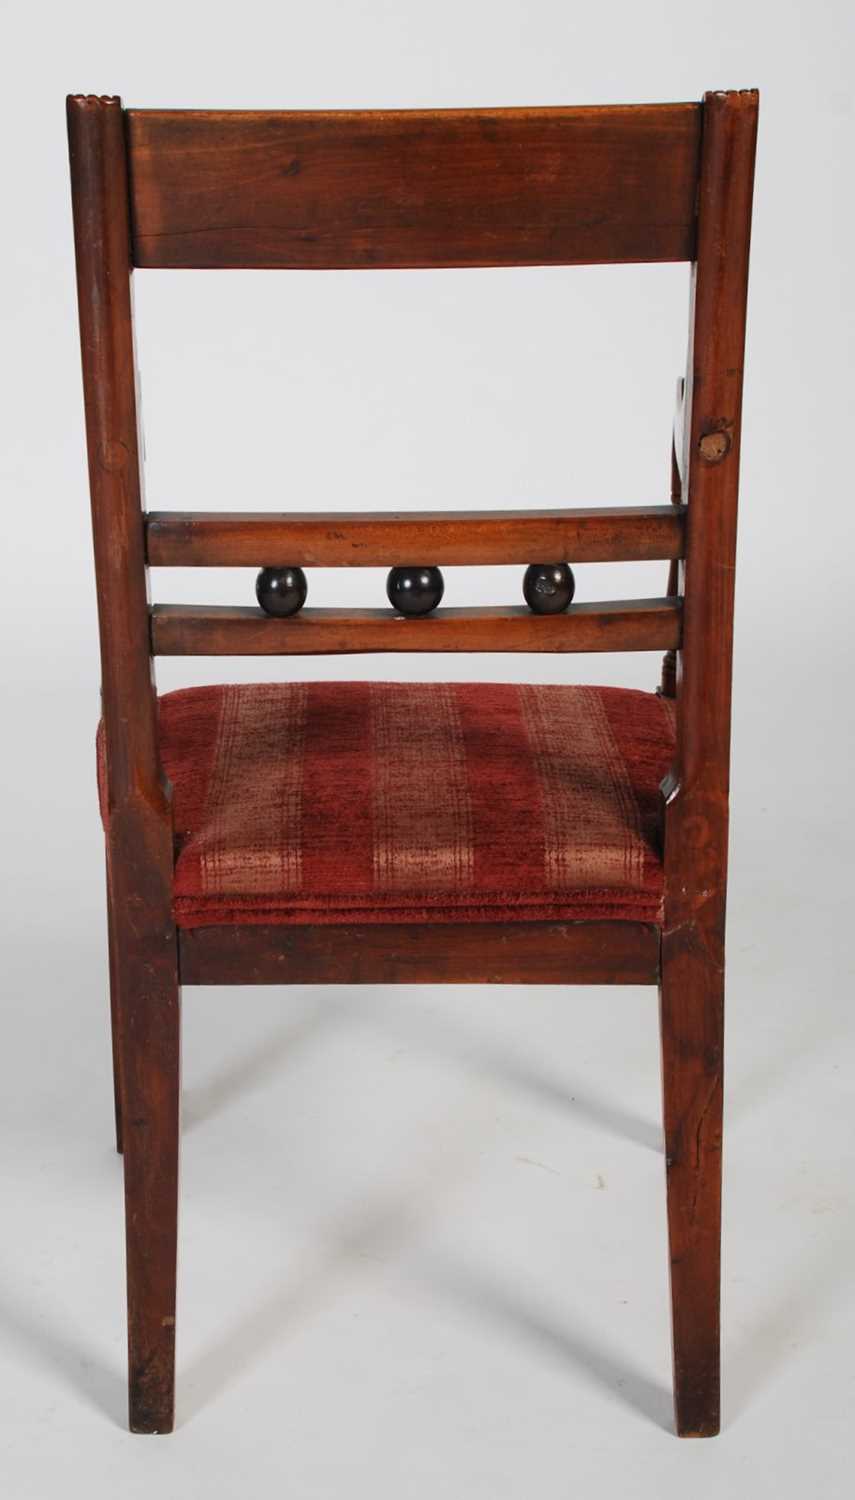 An early 19th century walnut and brass inlaid childs elbow chair, the rectangular top rail with - Image 6 of 6